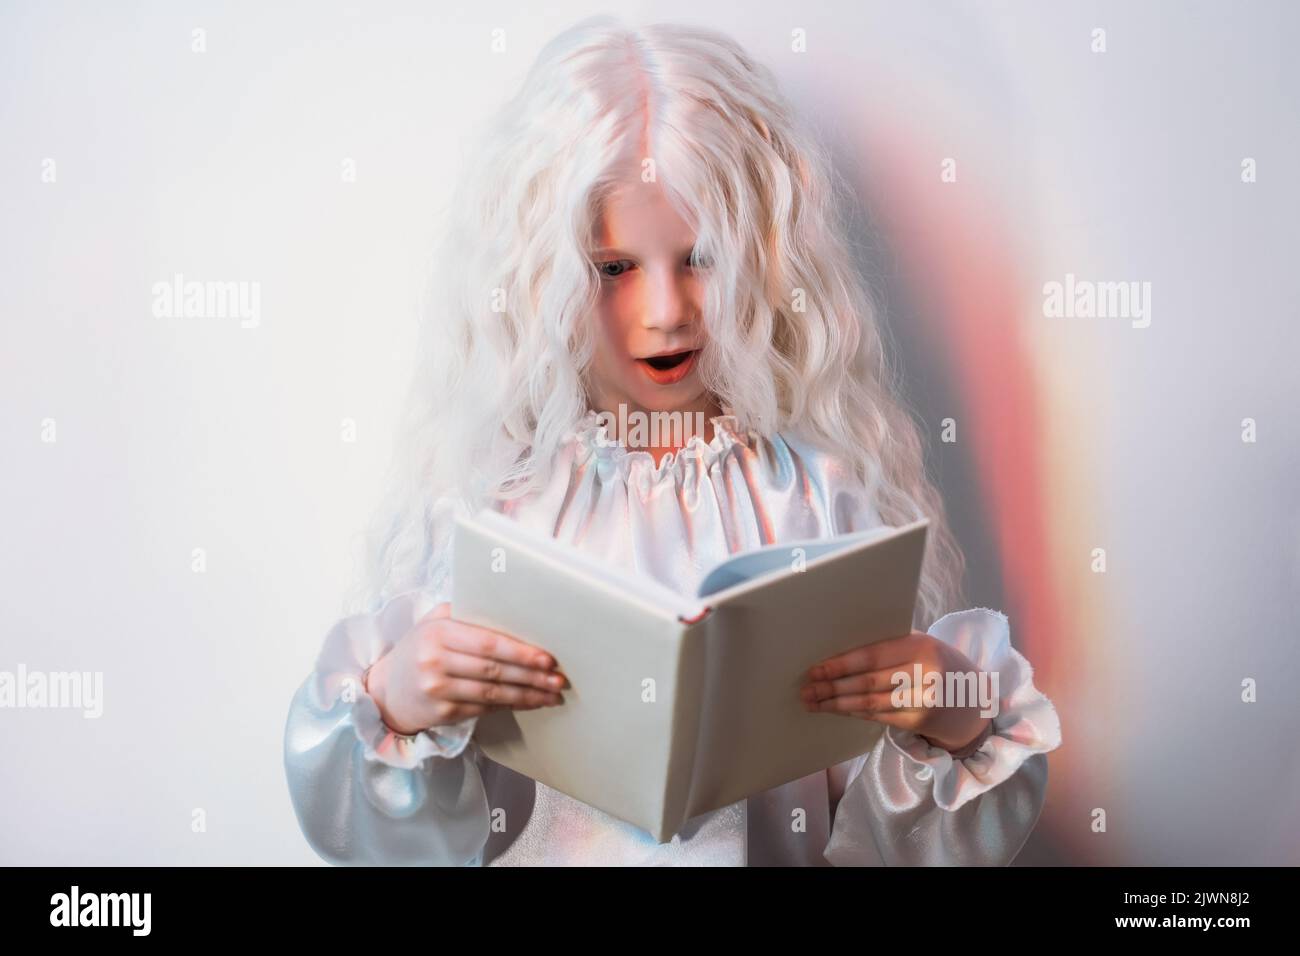 kid curiosity amazing discovery blonde girl book Stock Photo